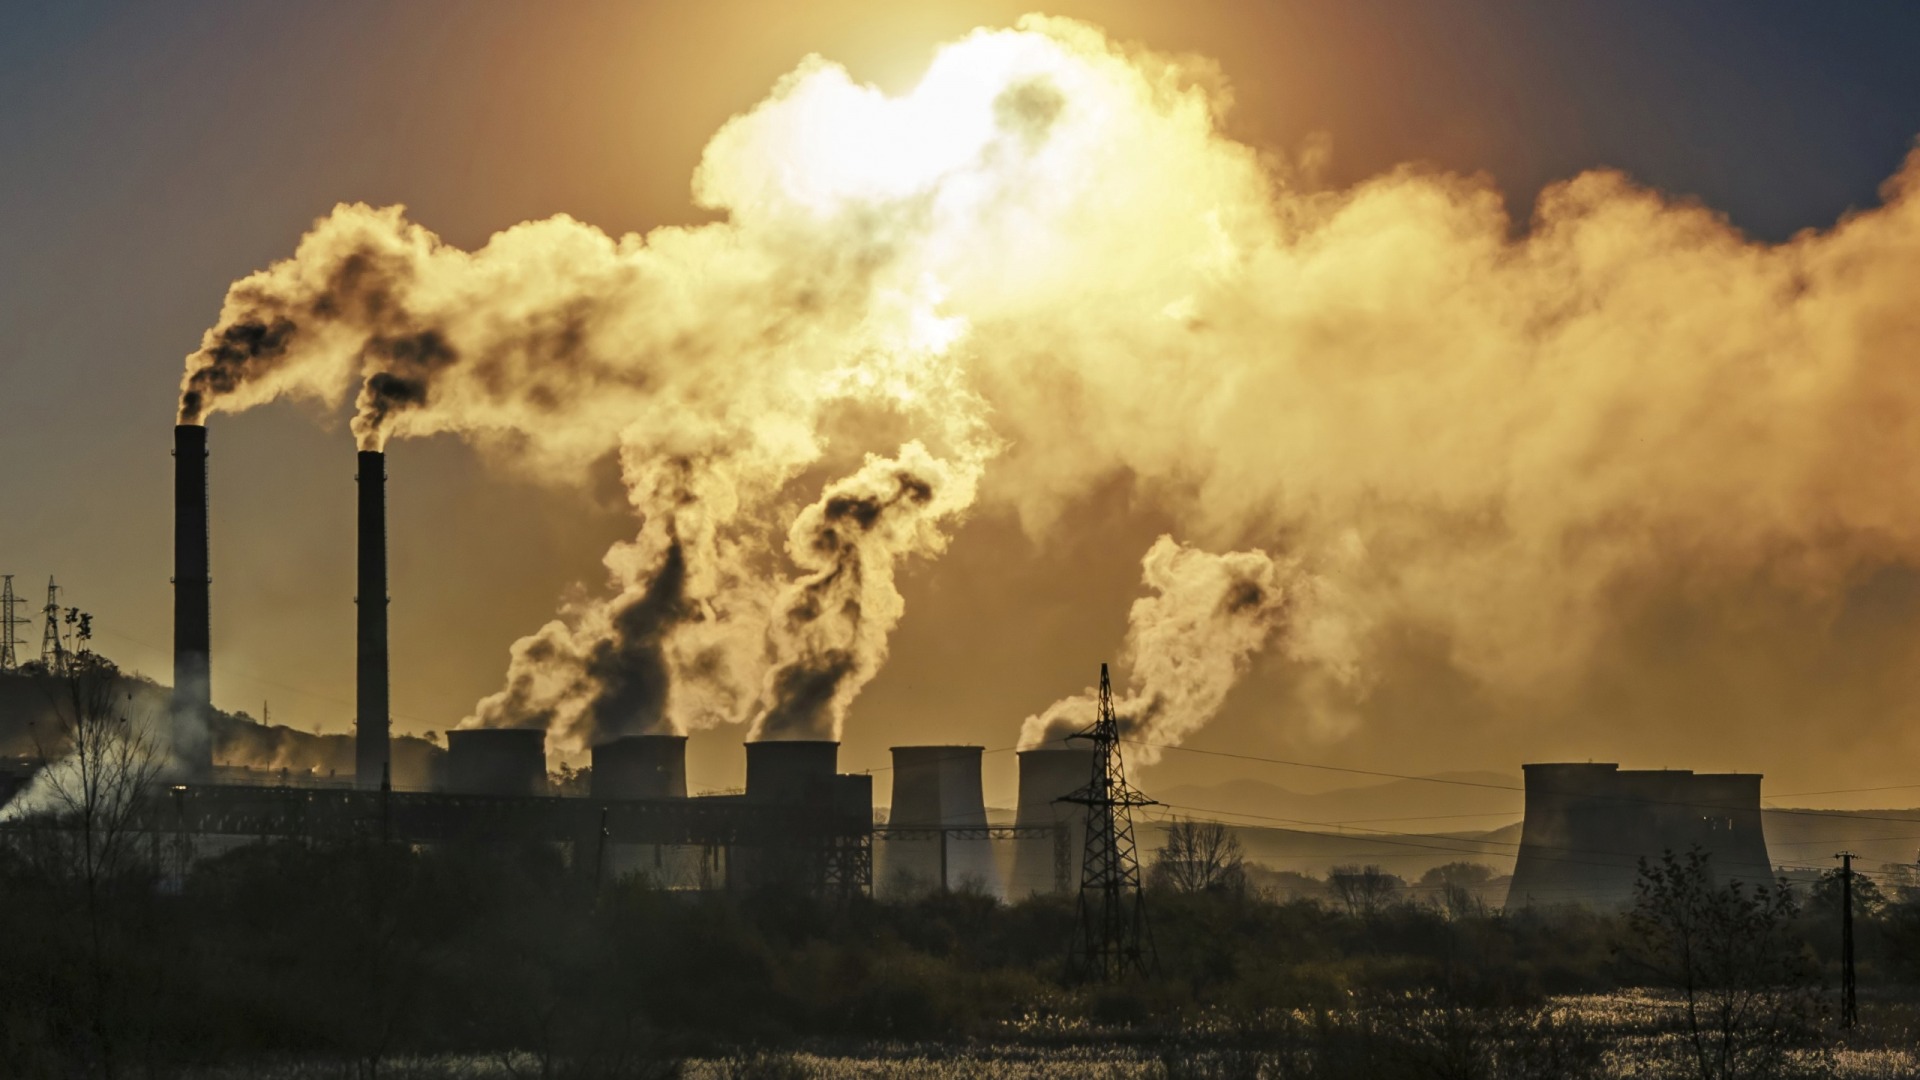 Greenhouse Gas Levels Hit Record High Amid Covid-19 Pandemic